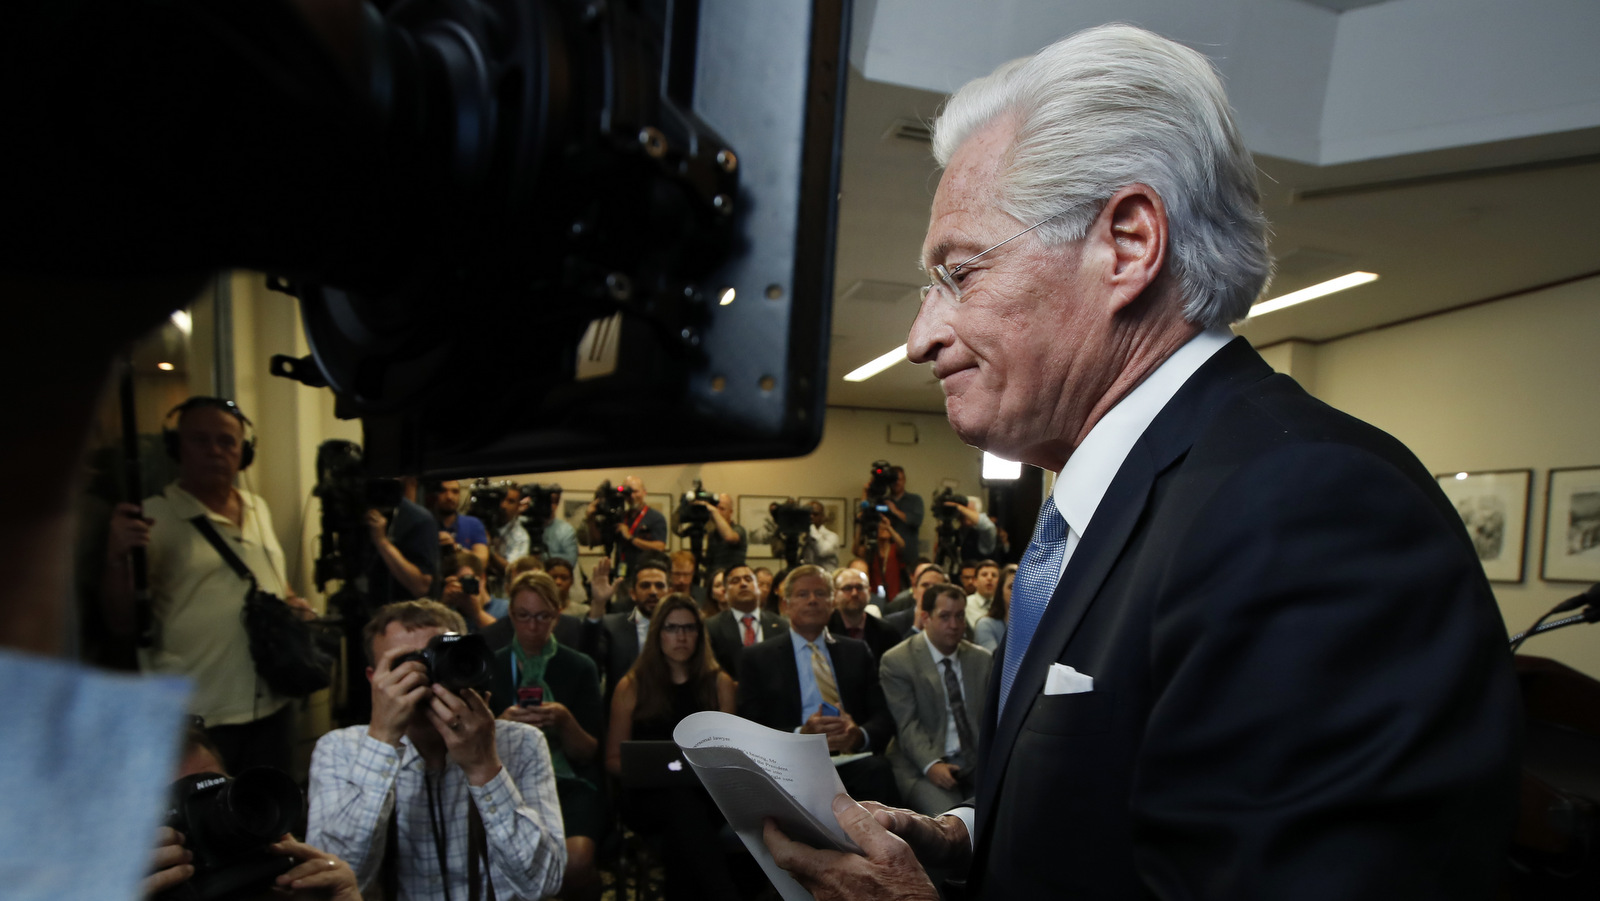 Marc Kasowitz personal attorney of President Donald Trump, leaves a packed room at the National Press Club in Washington. (AP/Manuel Balce Ceneta)